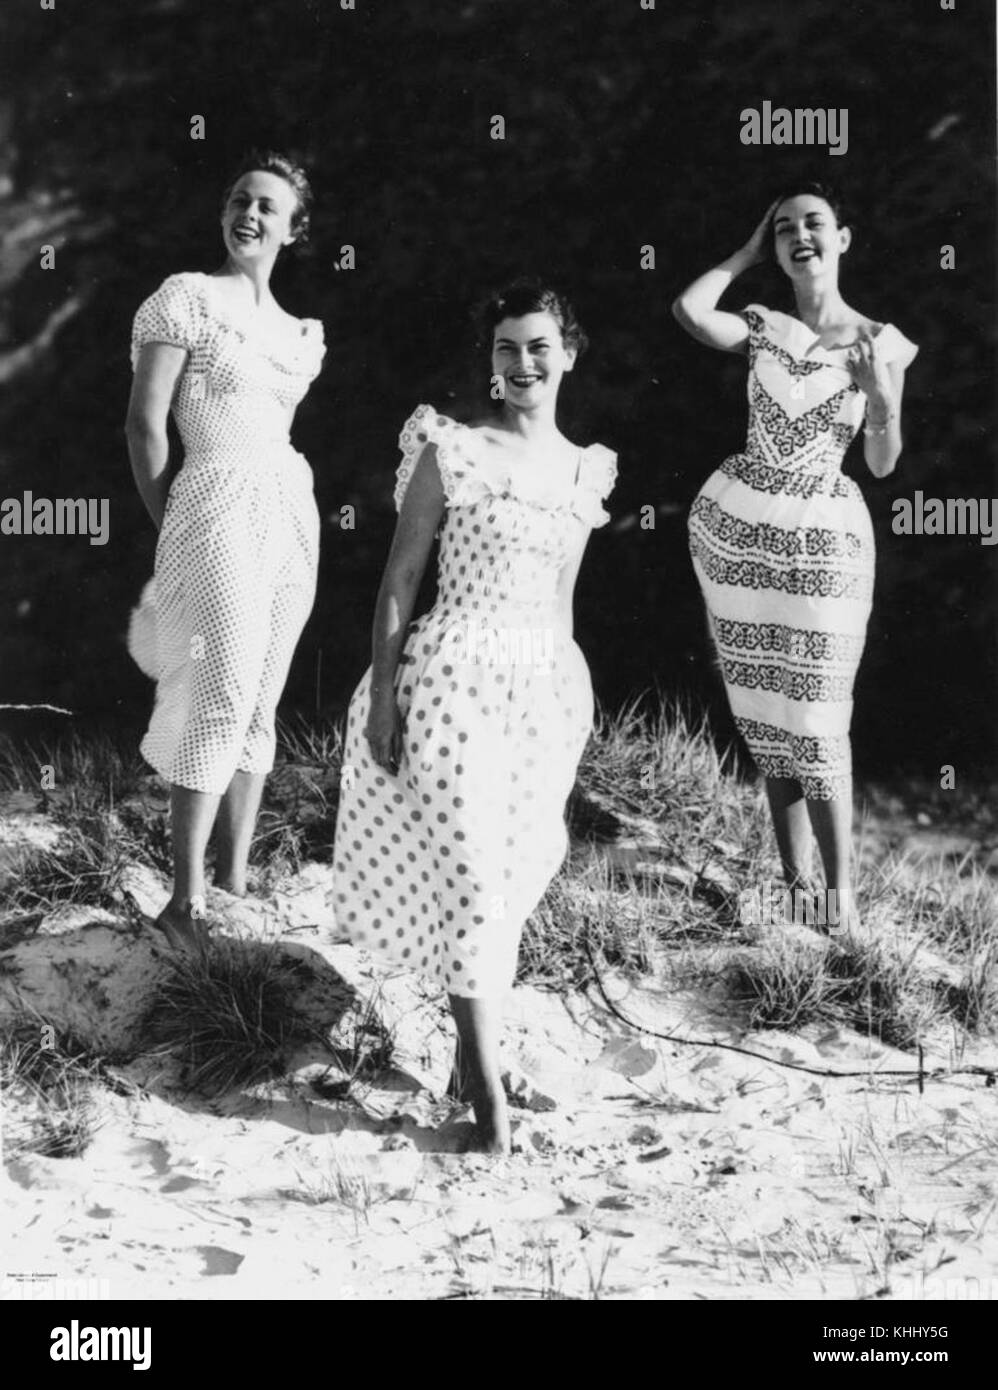 1 198347 Models wearing billowy dresses on the beach at Surfers Paradise, 1951 Stock Photo